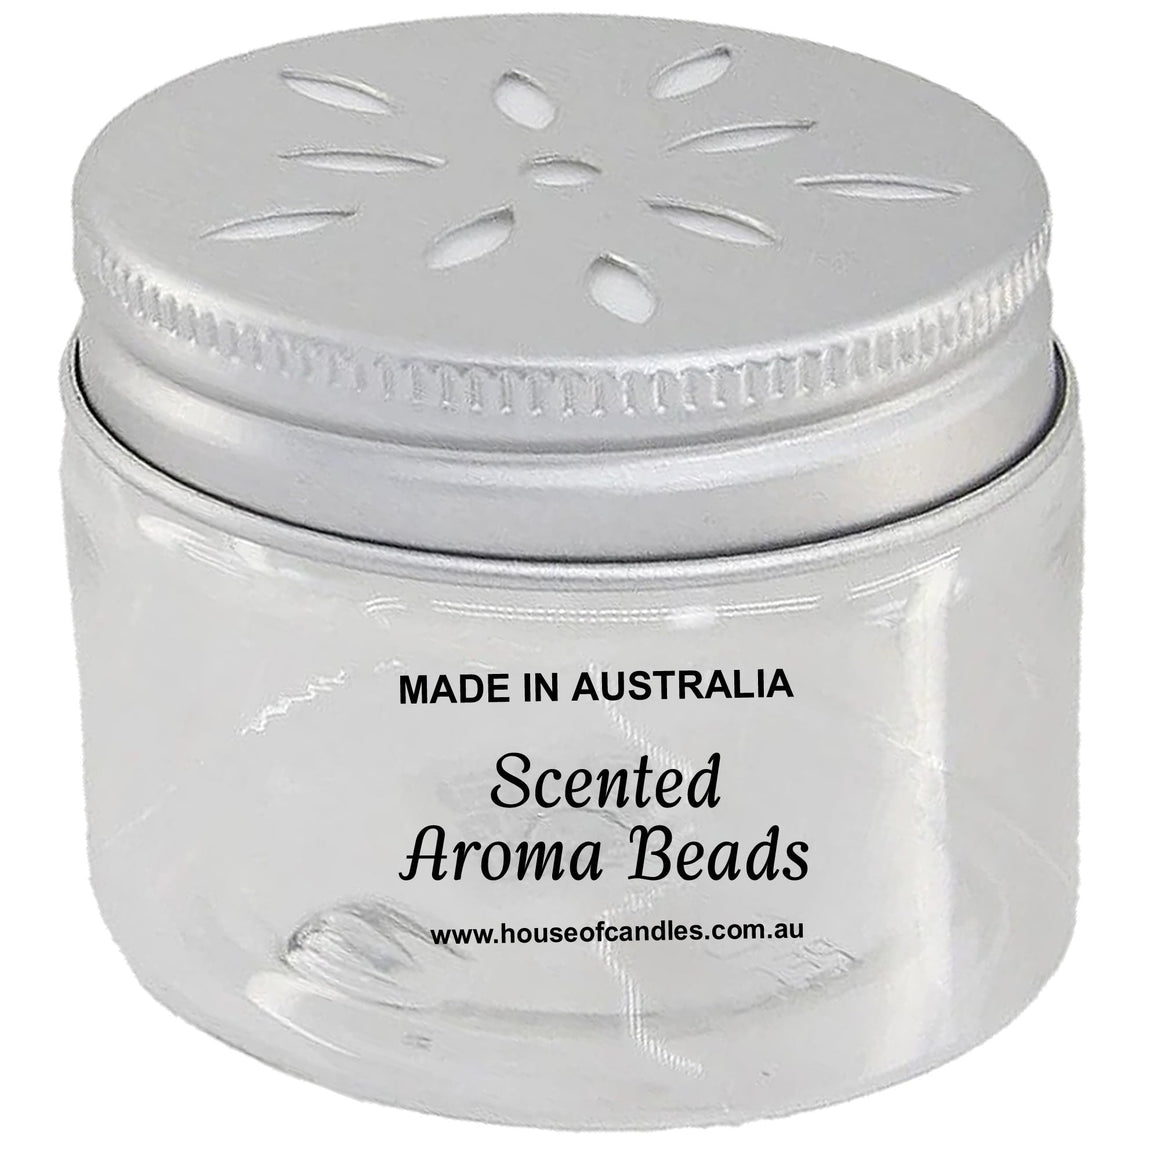 Tahitian Coconut Lime Scented Aroma Beads Room/Car Air Freshener